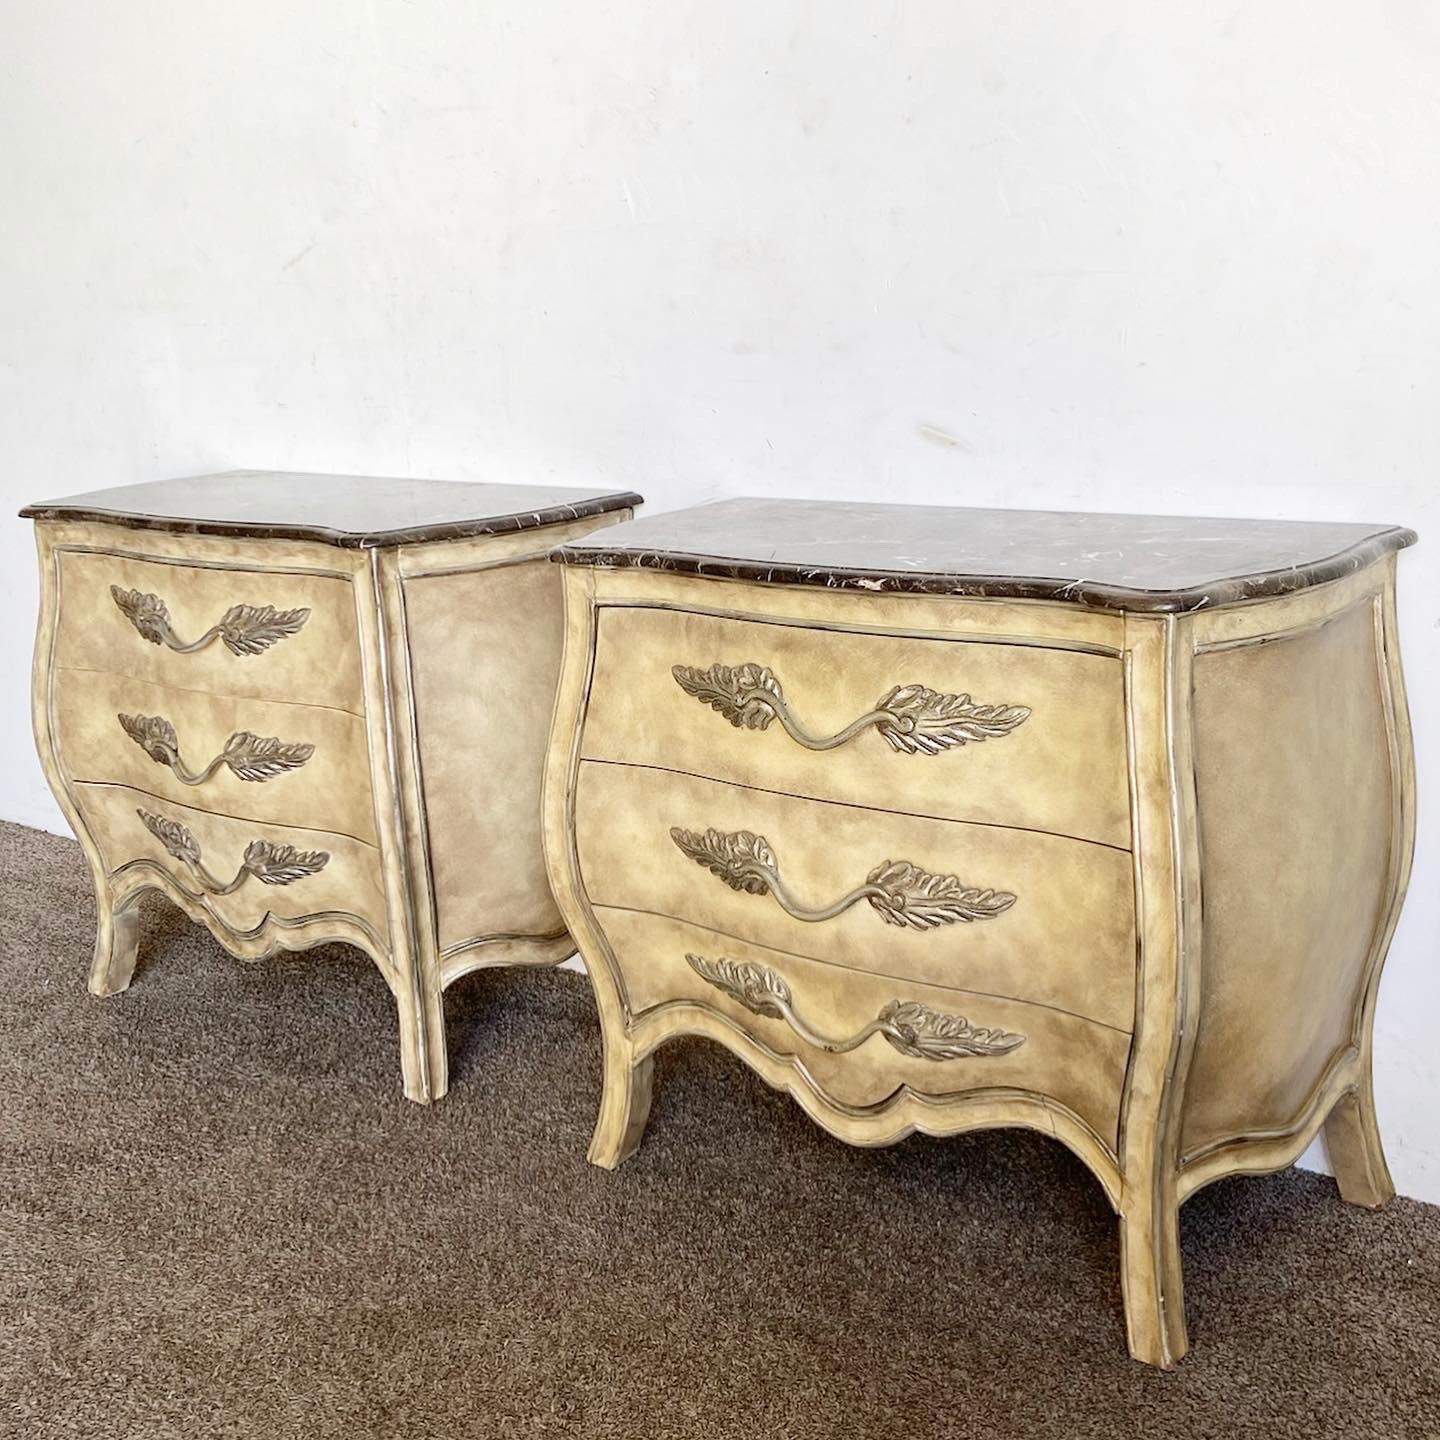 Experience classic French elegance with this pair of Marble Bomb√© Commodes. Their distinctive bulging silhouette, a hallmark of the Bomb√© style, is beautifully crowned with luxurious marble tops. Adorned with intricate detailing, these wooden